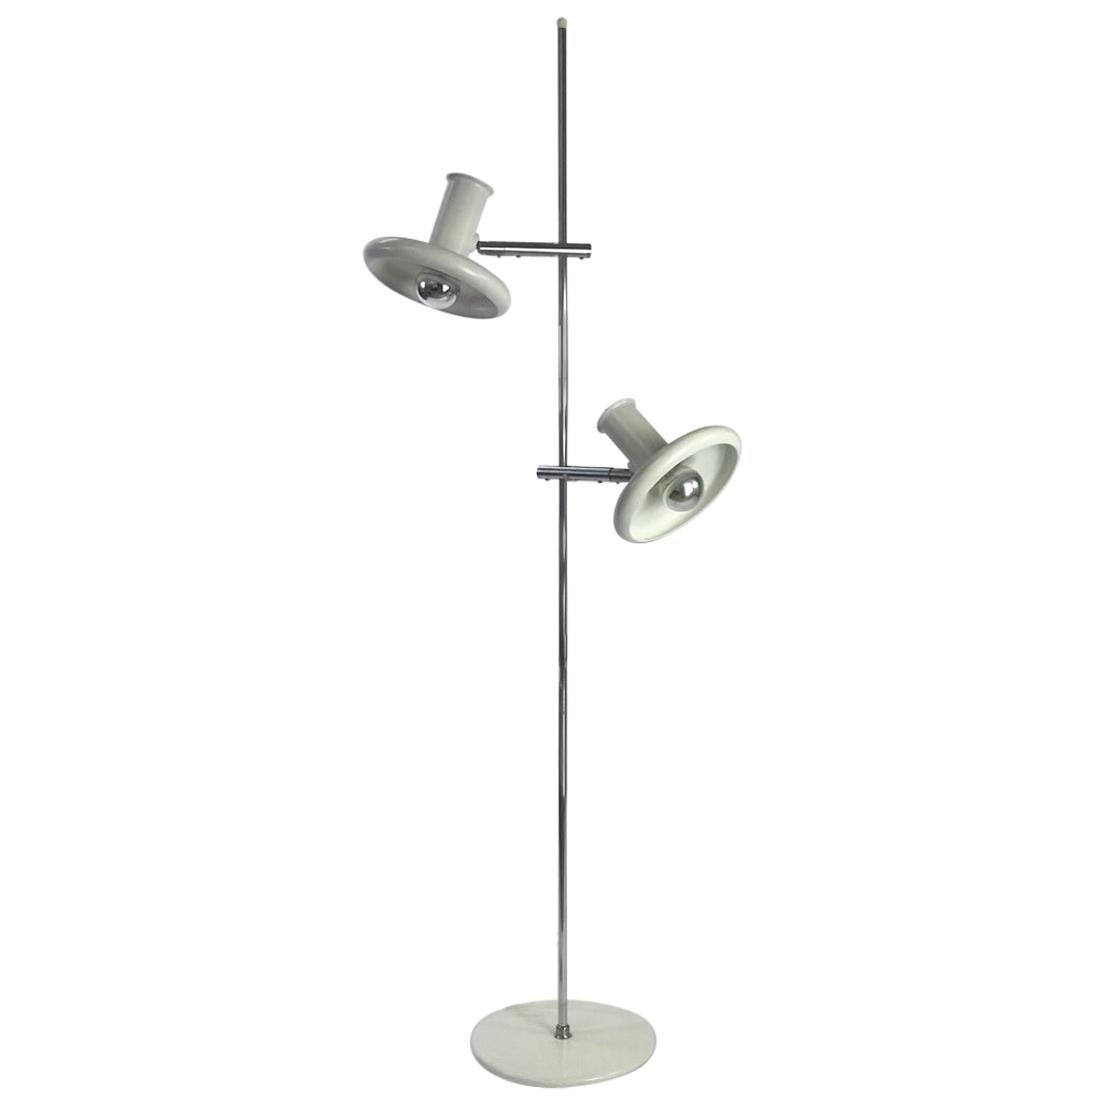 Classic Danish Floor Lamp from the 1970s by Hans Due for Fog & Mørup